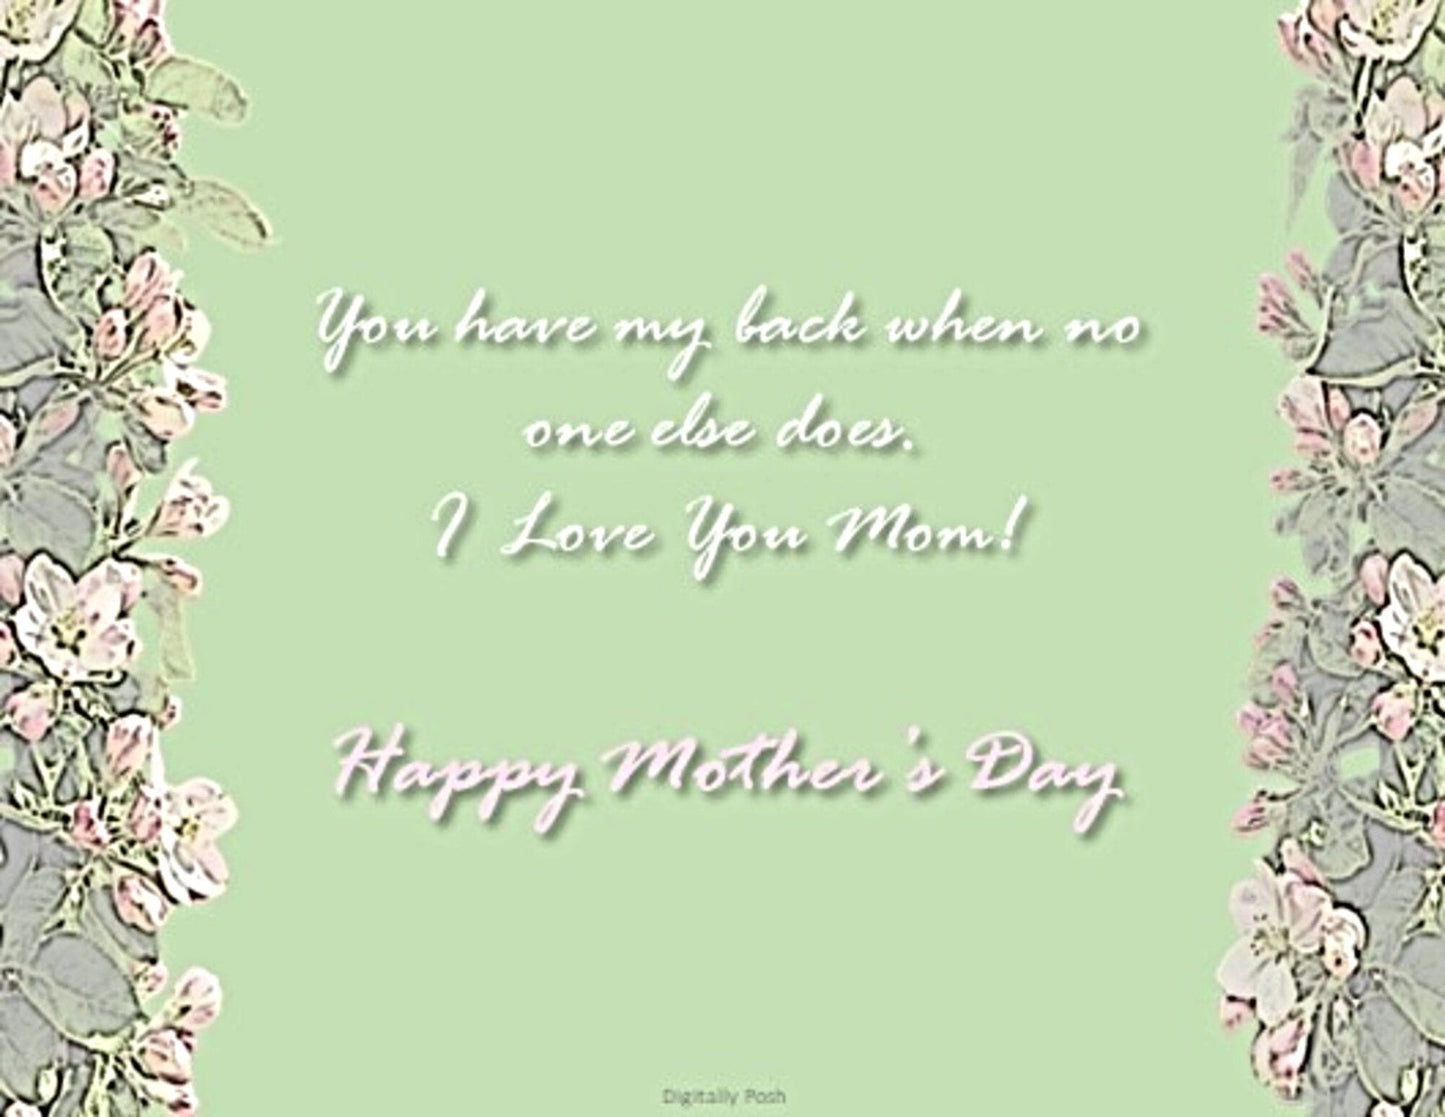 Mothers Day Card Printable | Custom Mothers Day Card | Mother's Day Card | Printable Mothers Day Card Digital Download